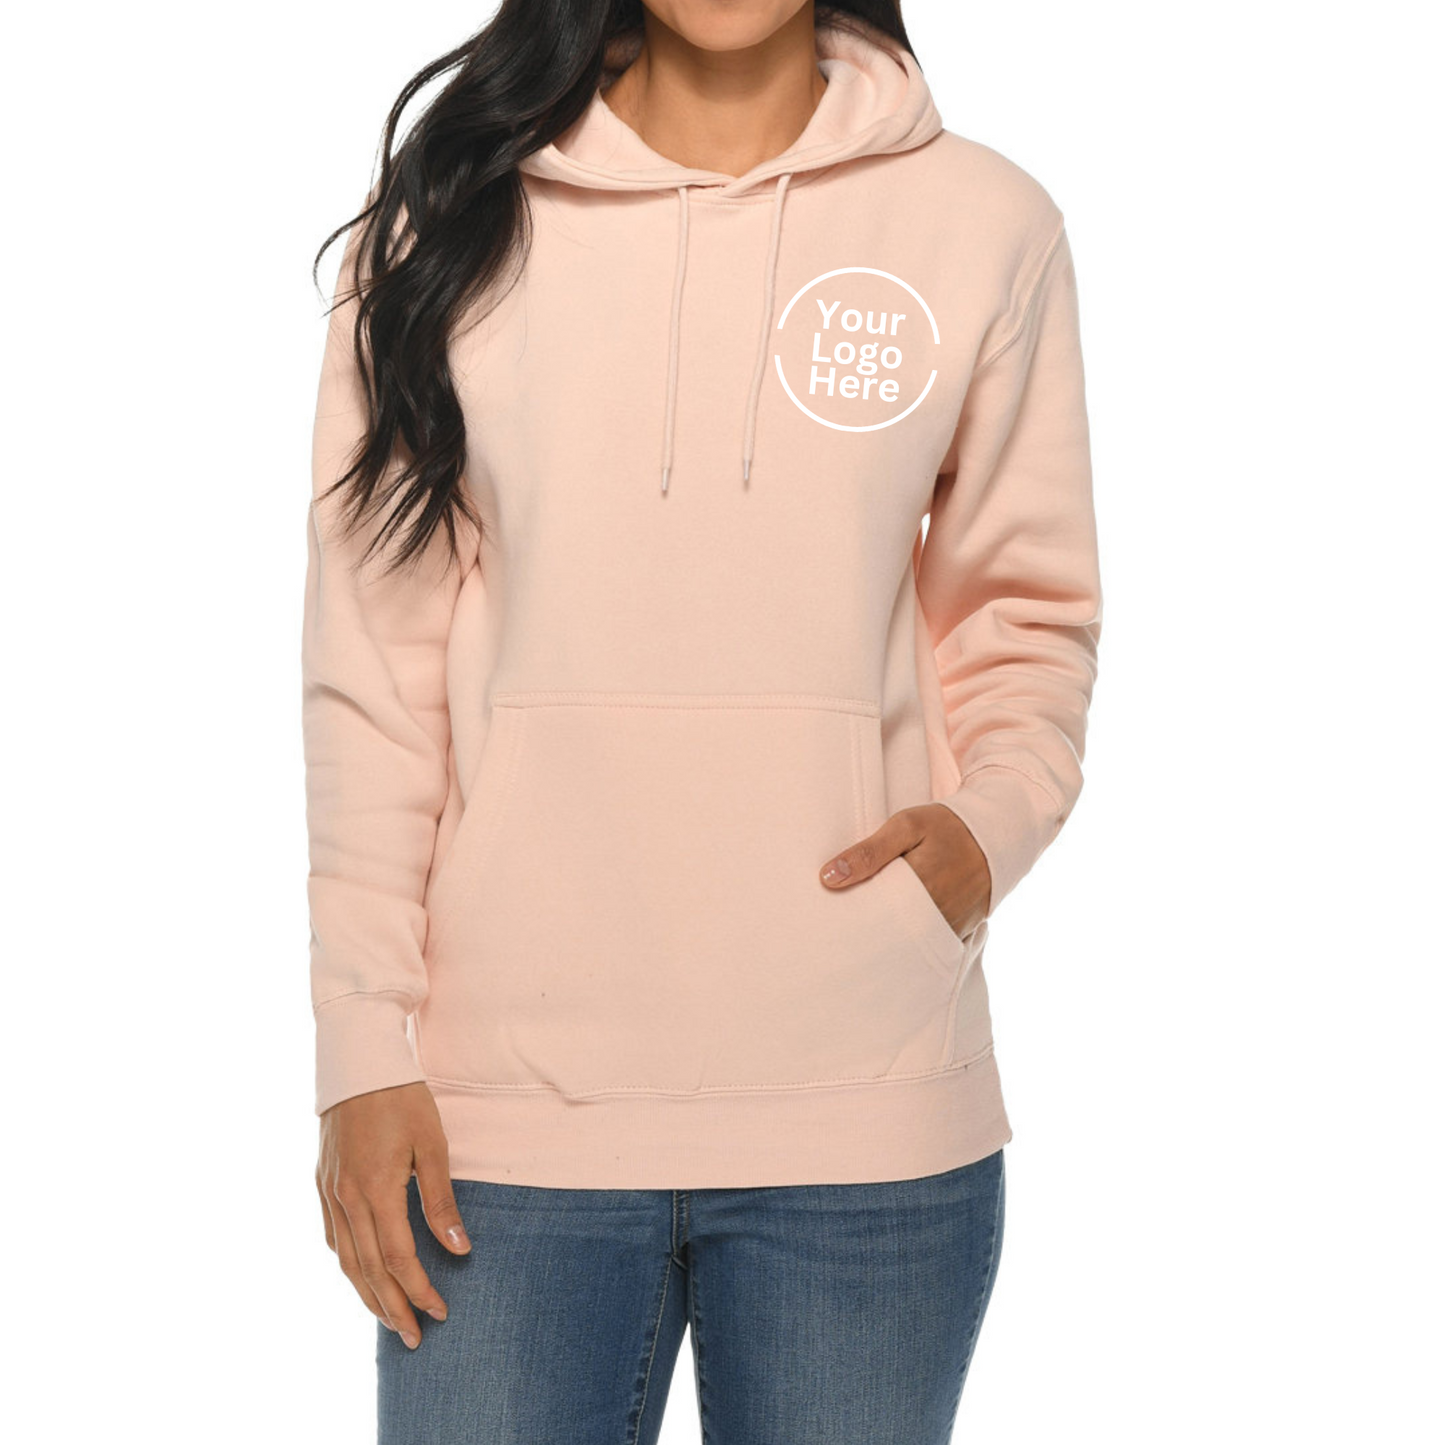 DesignDash - Embroidered Hoodie Four Pack